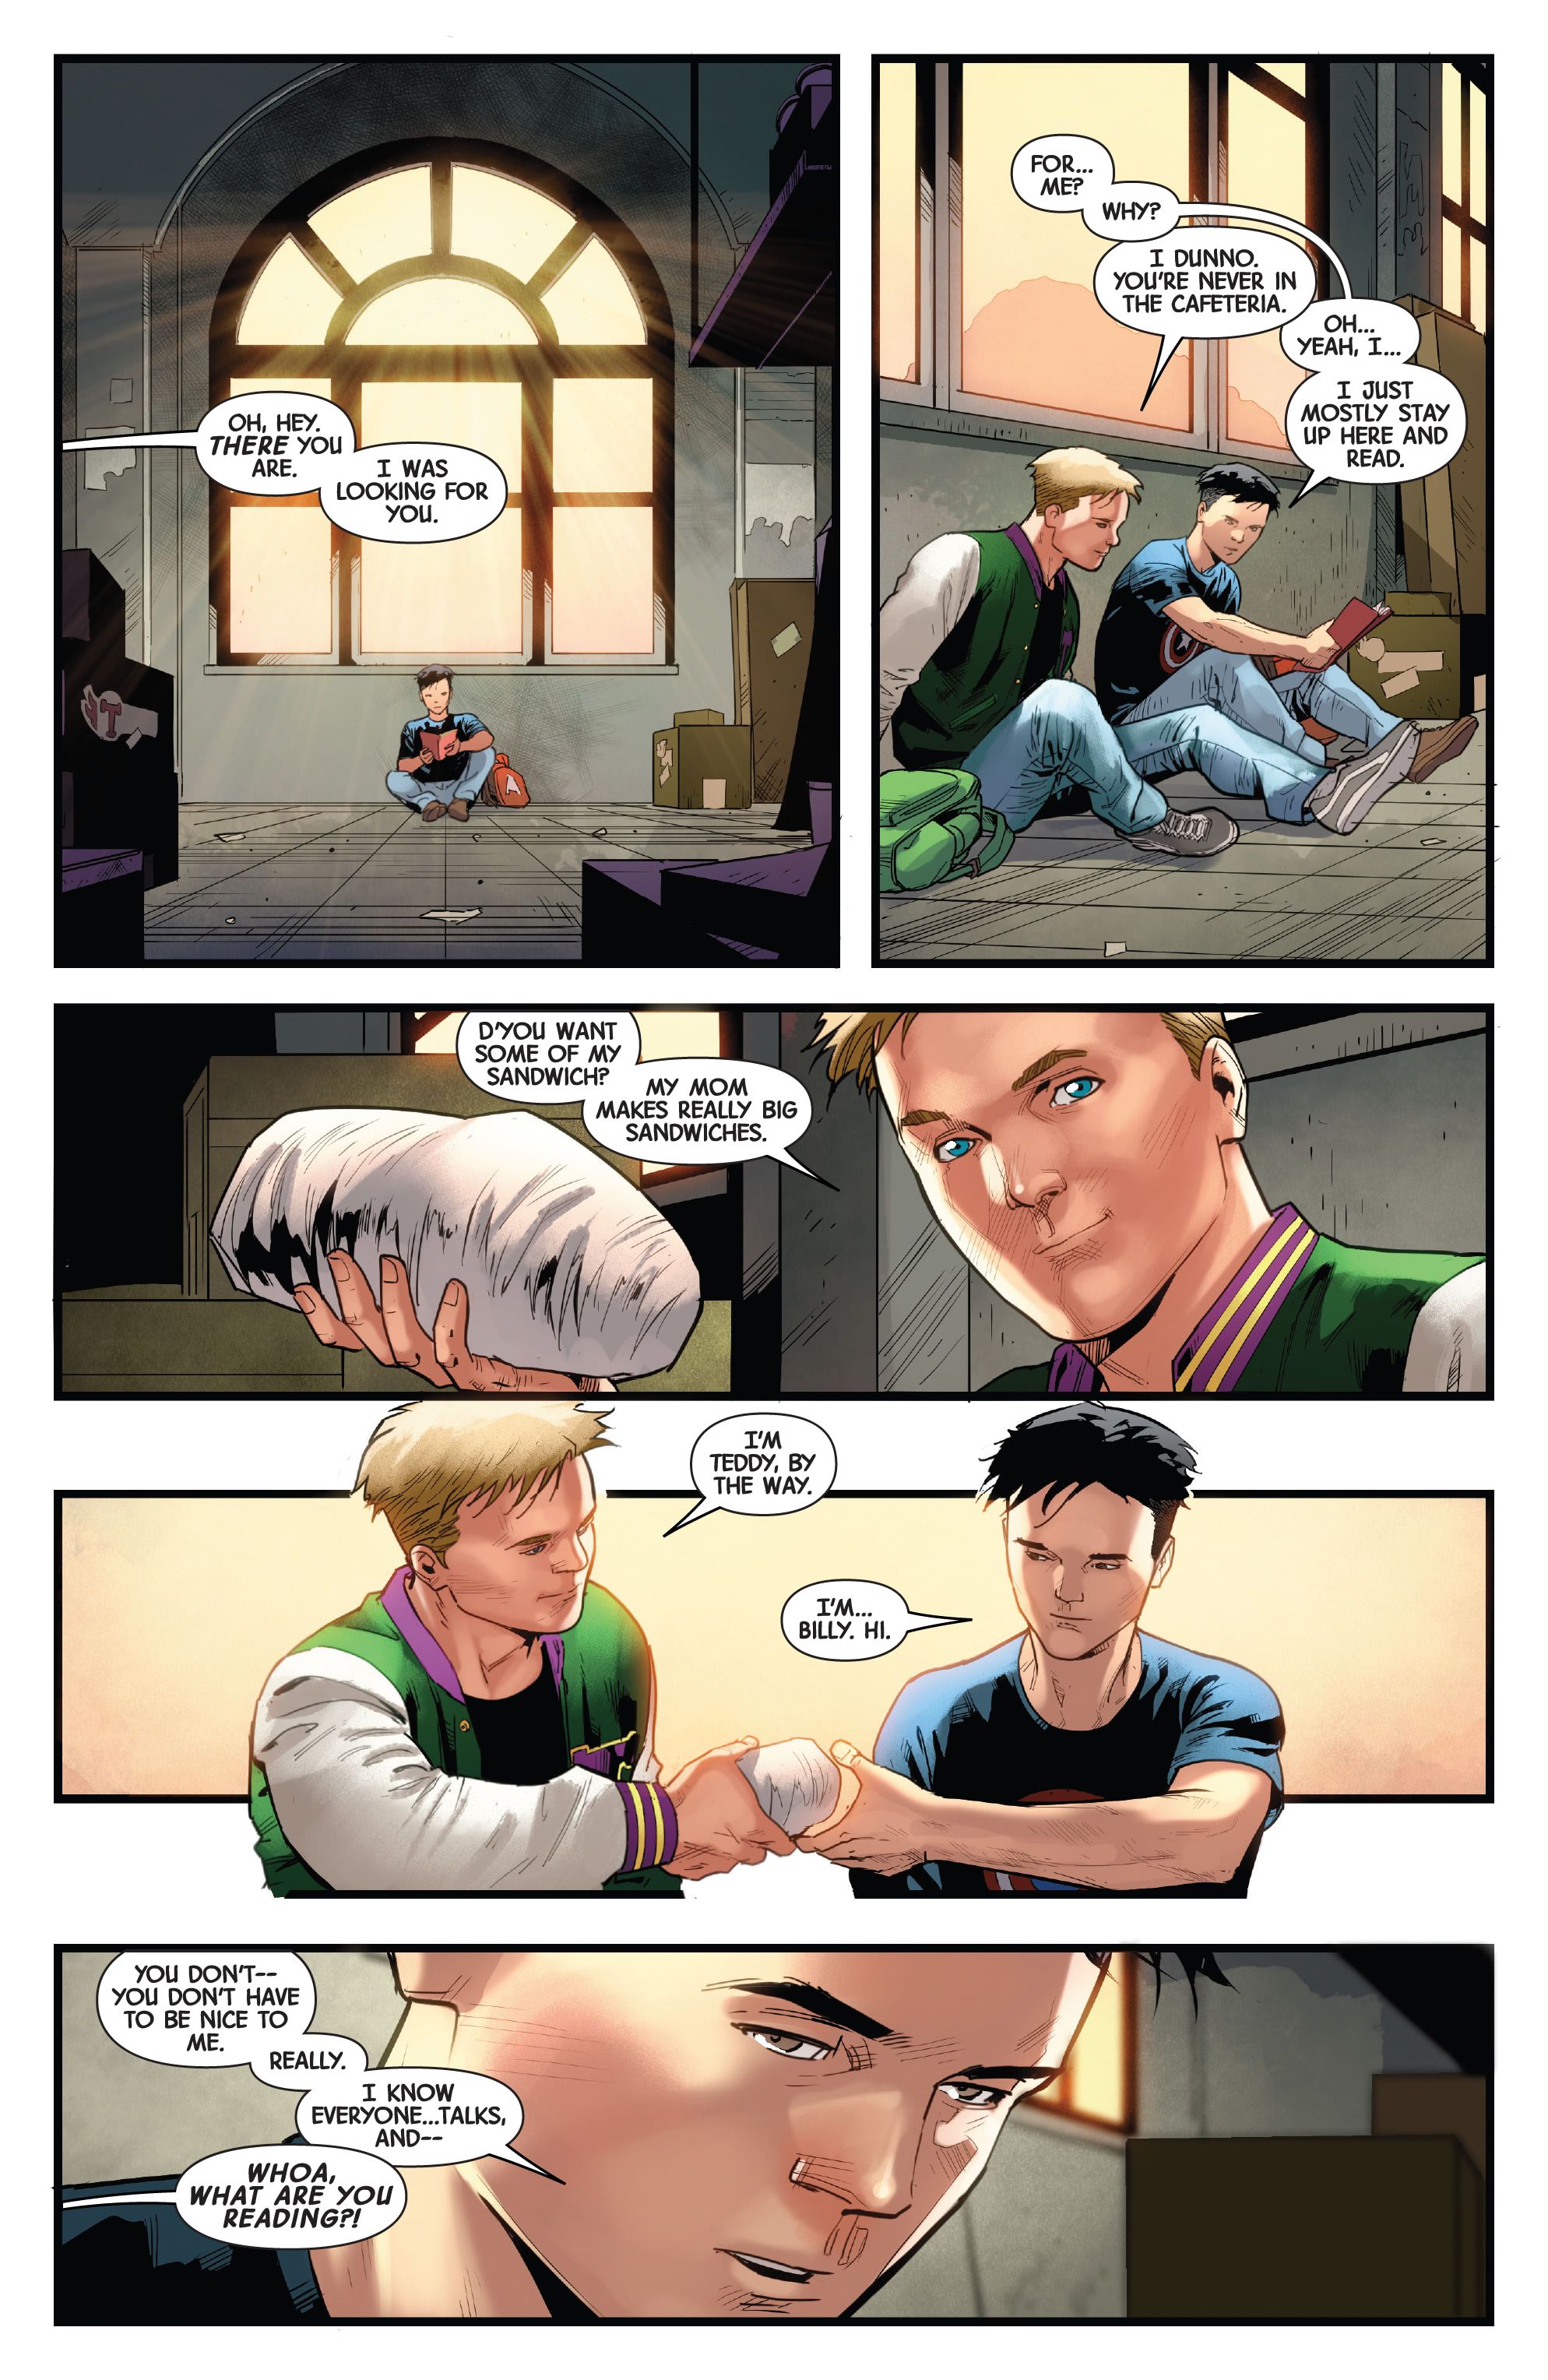 Marvel Just Changed the Young Avengers’ Origin Story